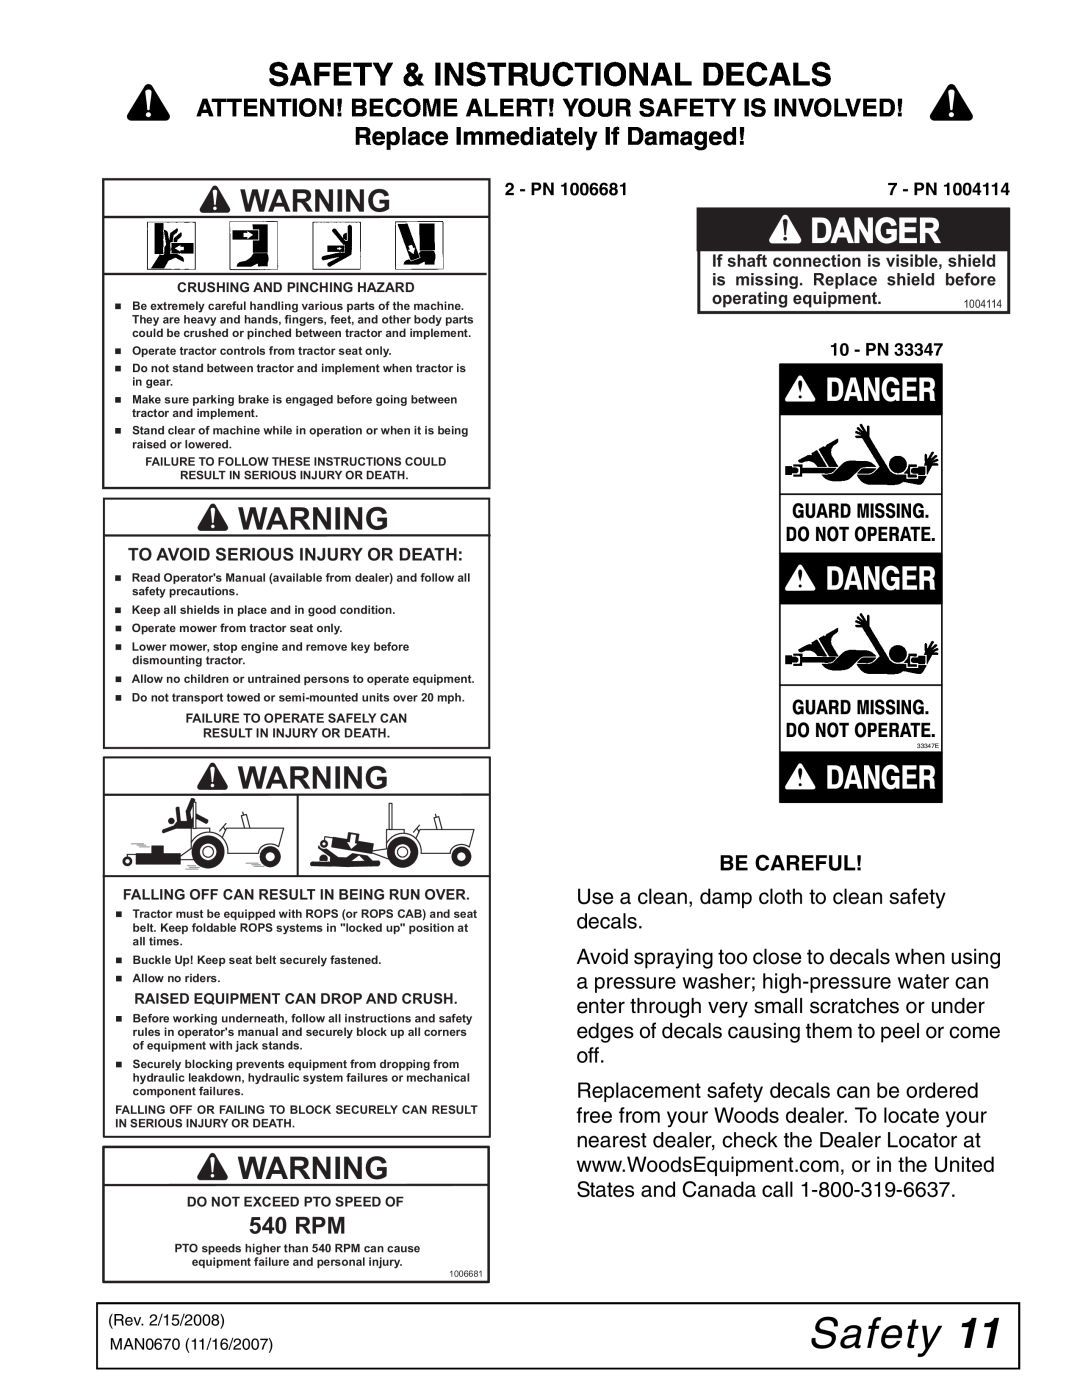 Woods Equipment HC60 33347E, Danger, Safety & Instructional Decals, Attention! Become Alert! Your Safety Is Involved 